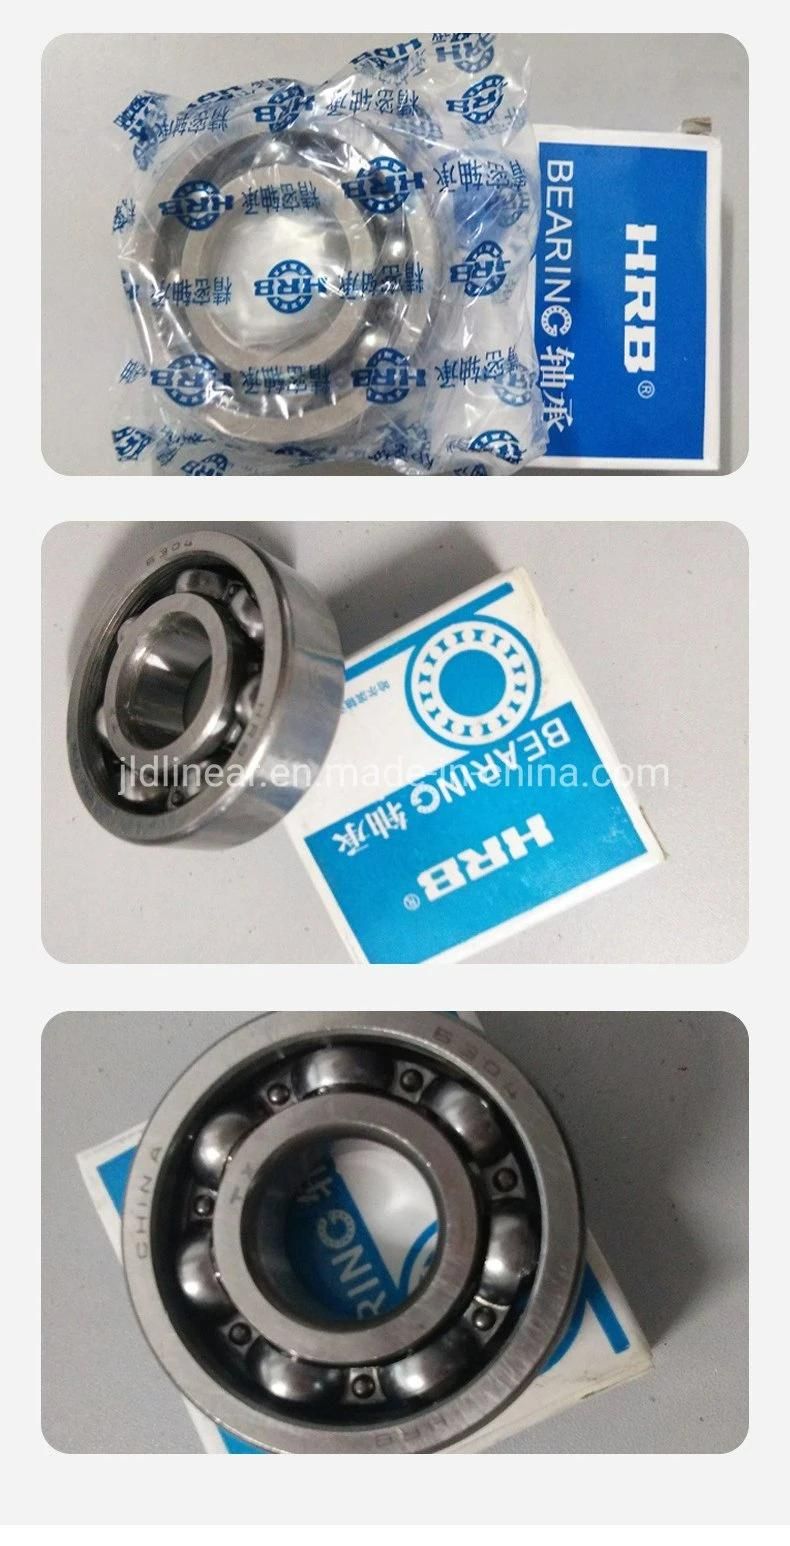 Bearing Factory/Auto Motorcycle Parts Hrb Zwz Bearing/Deep Groove Ball Bearing/Linear Ball Bearing/Rod End Spherical Plain Bearing/Needle Track Roller Bearing